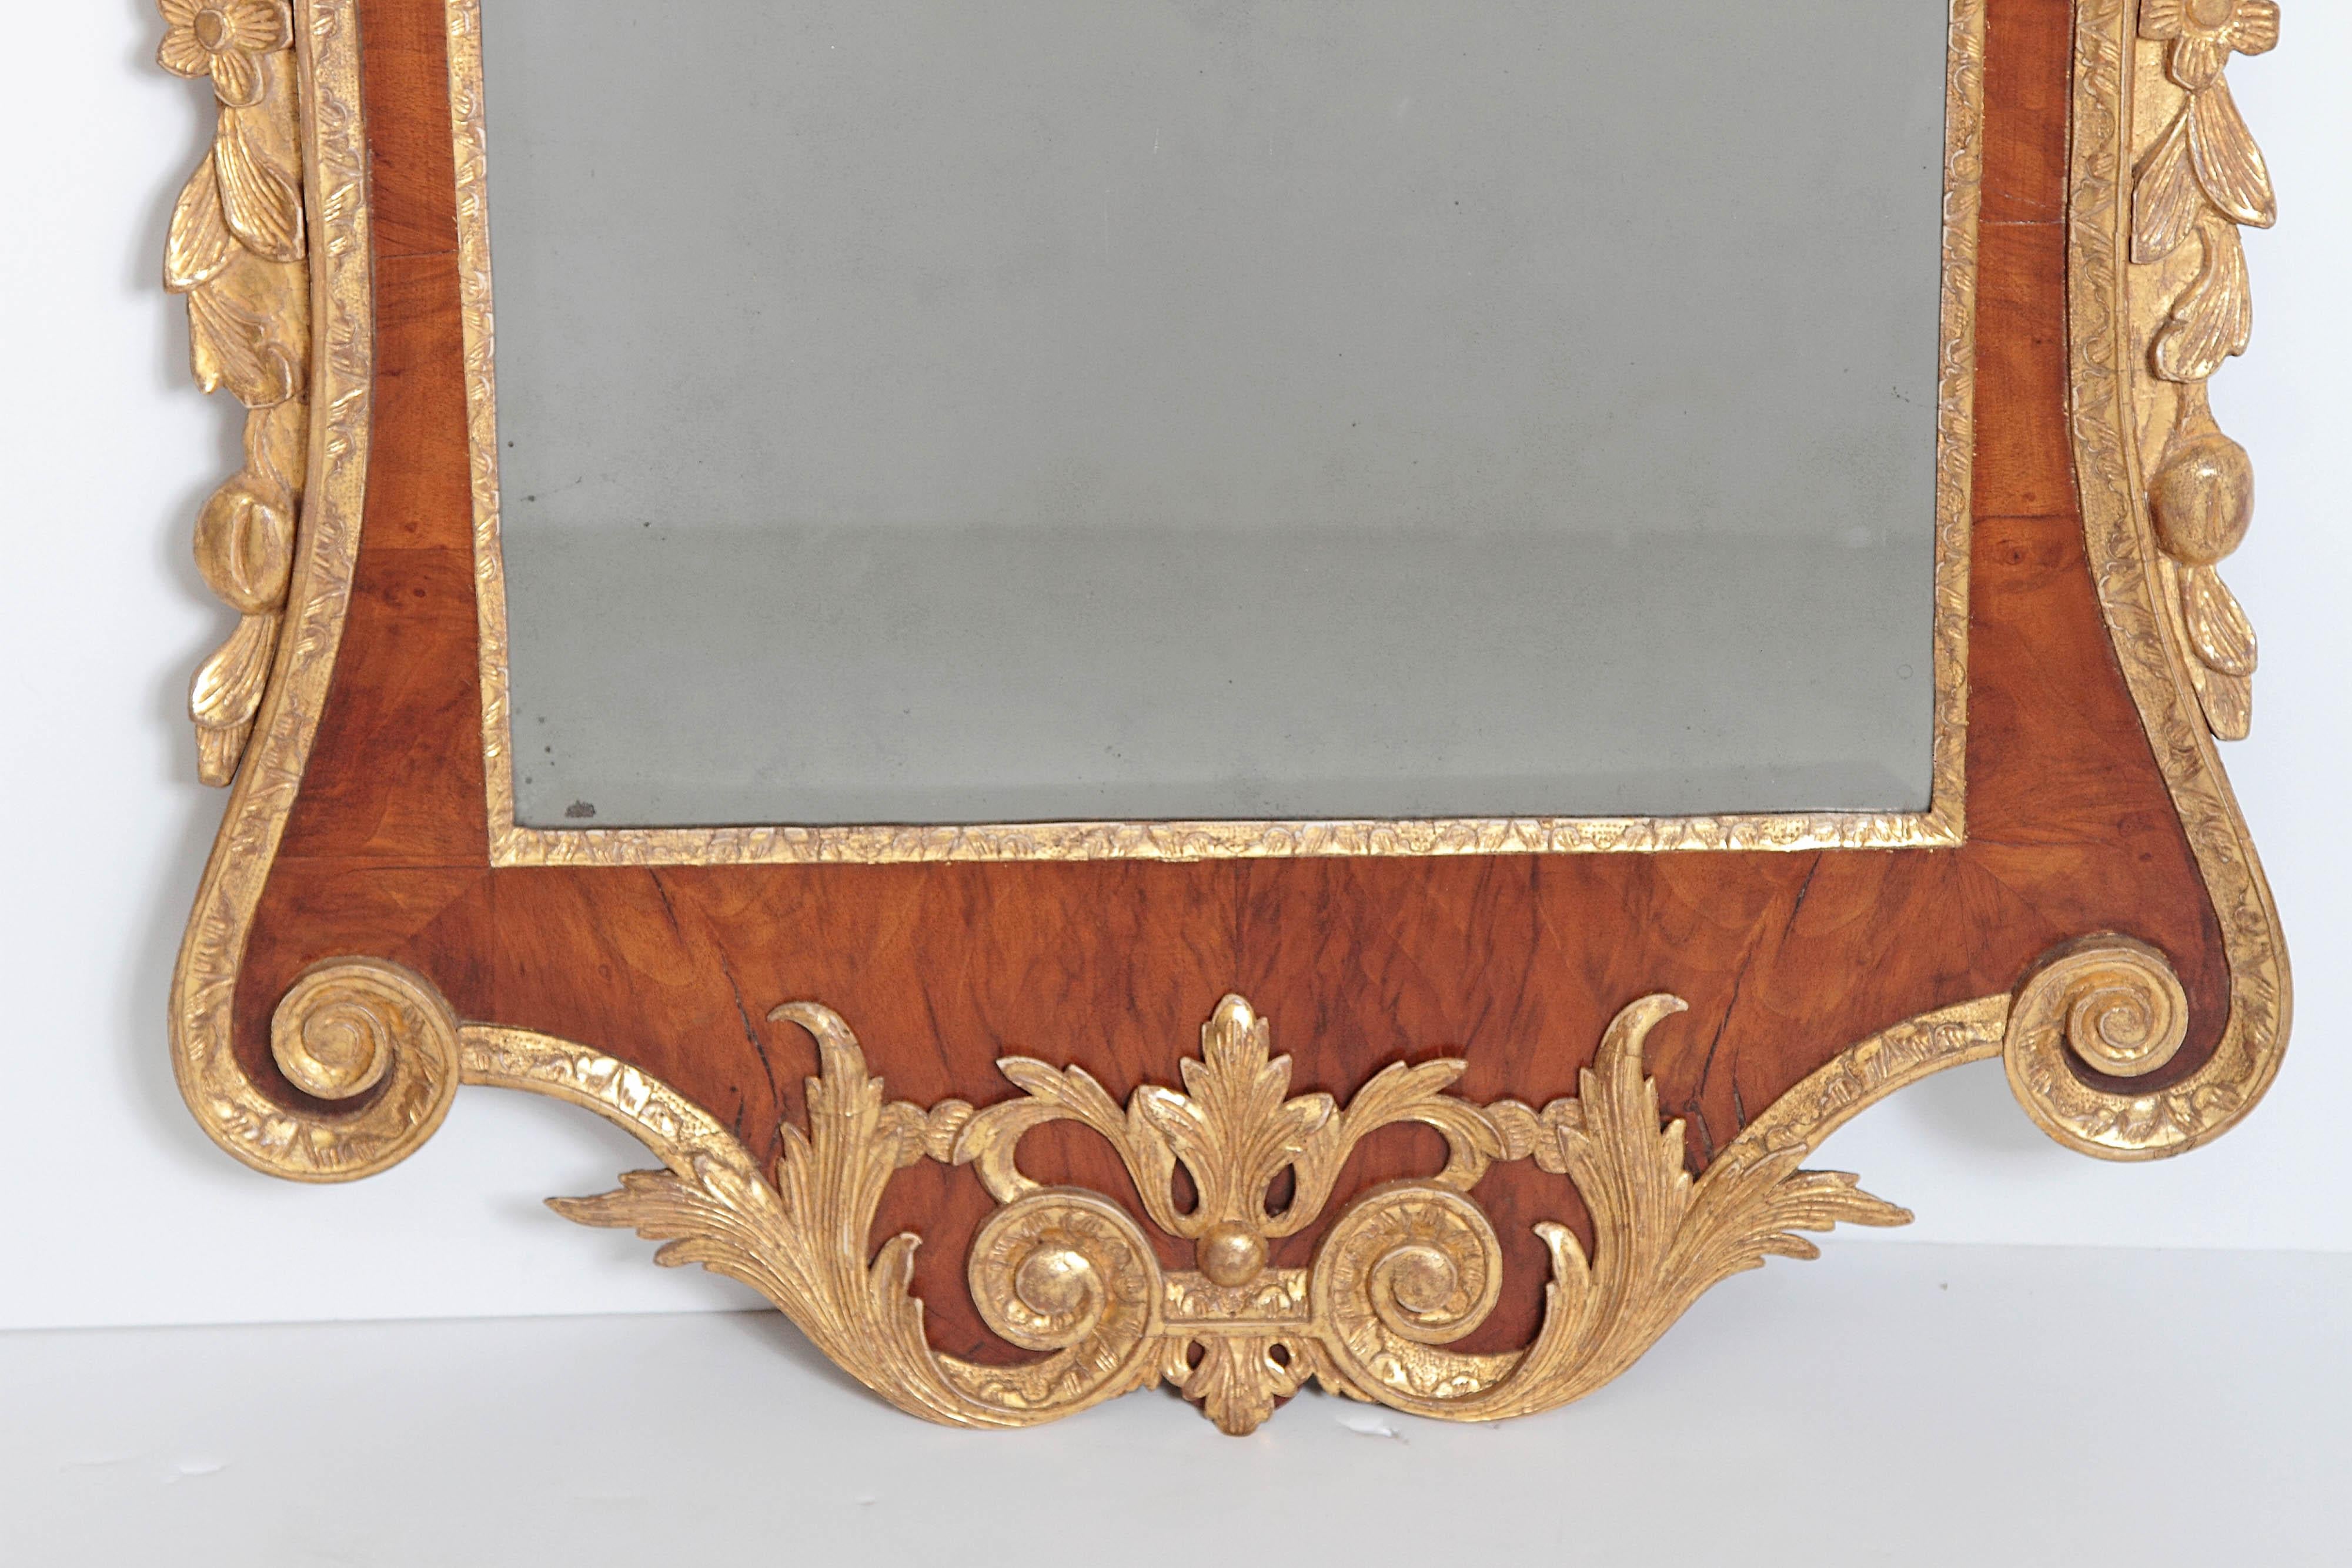 Period George II Pier Glass with Bookmatched Walnut Veneers 1